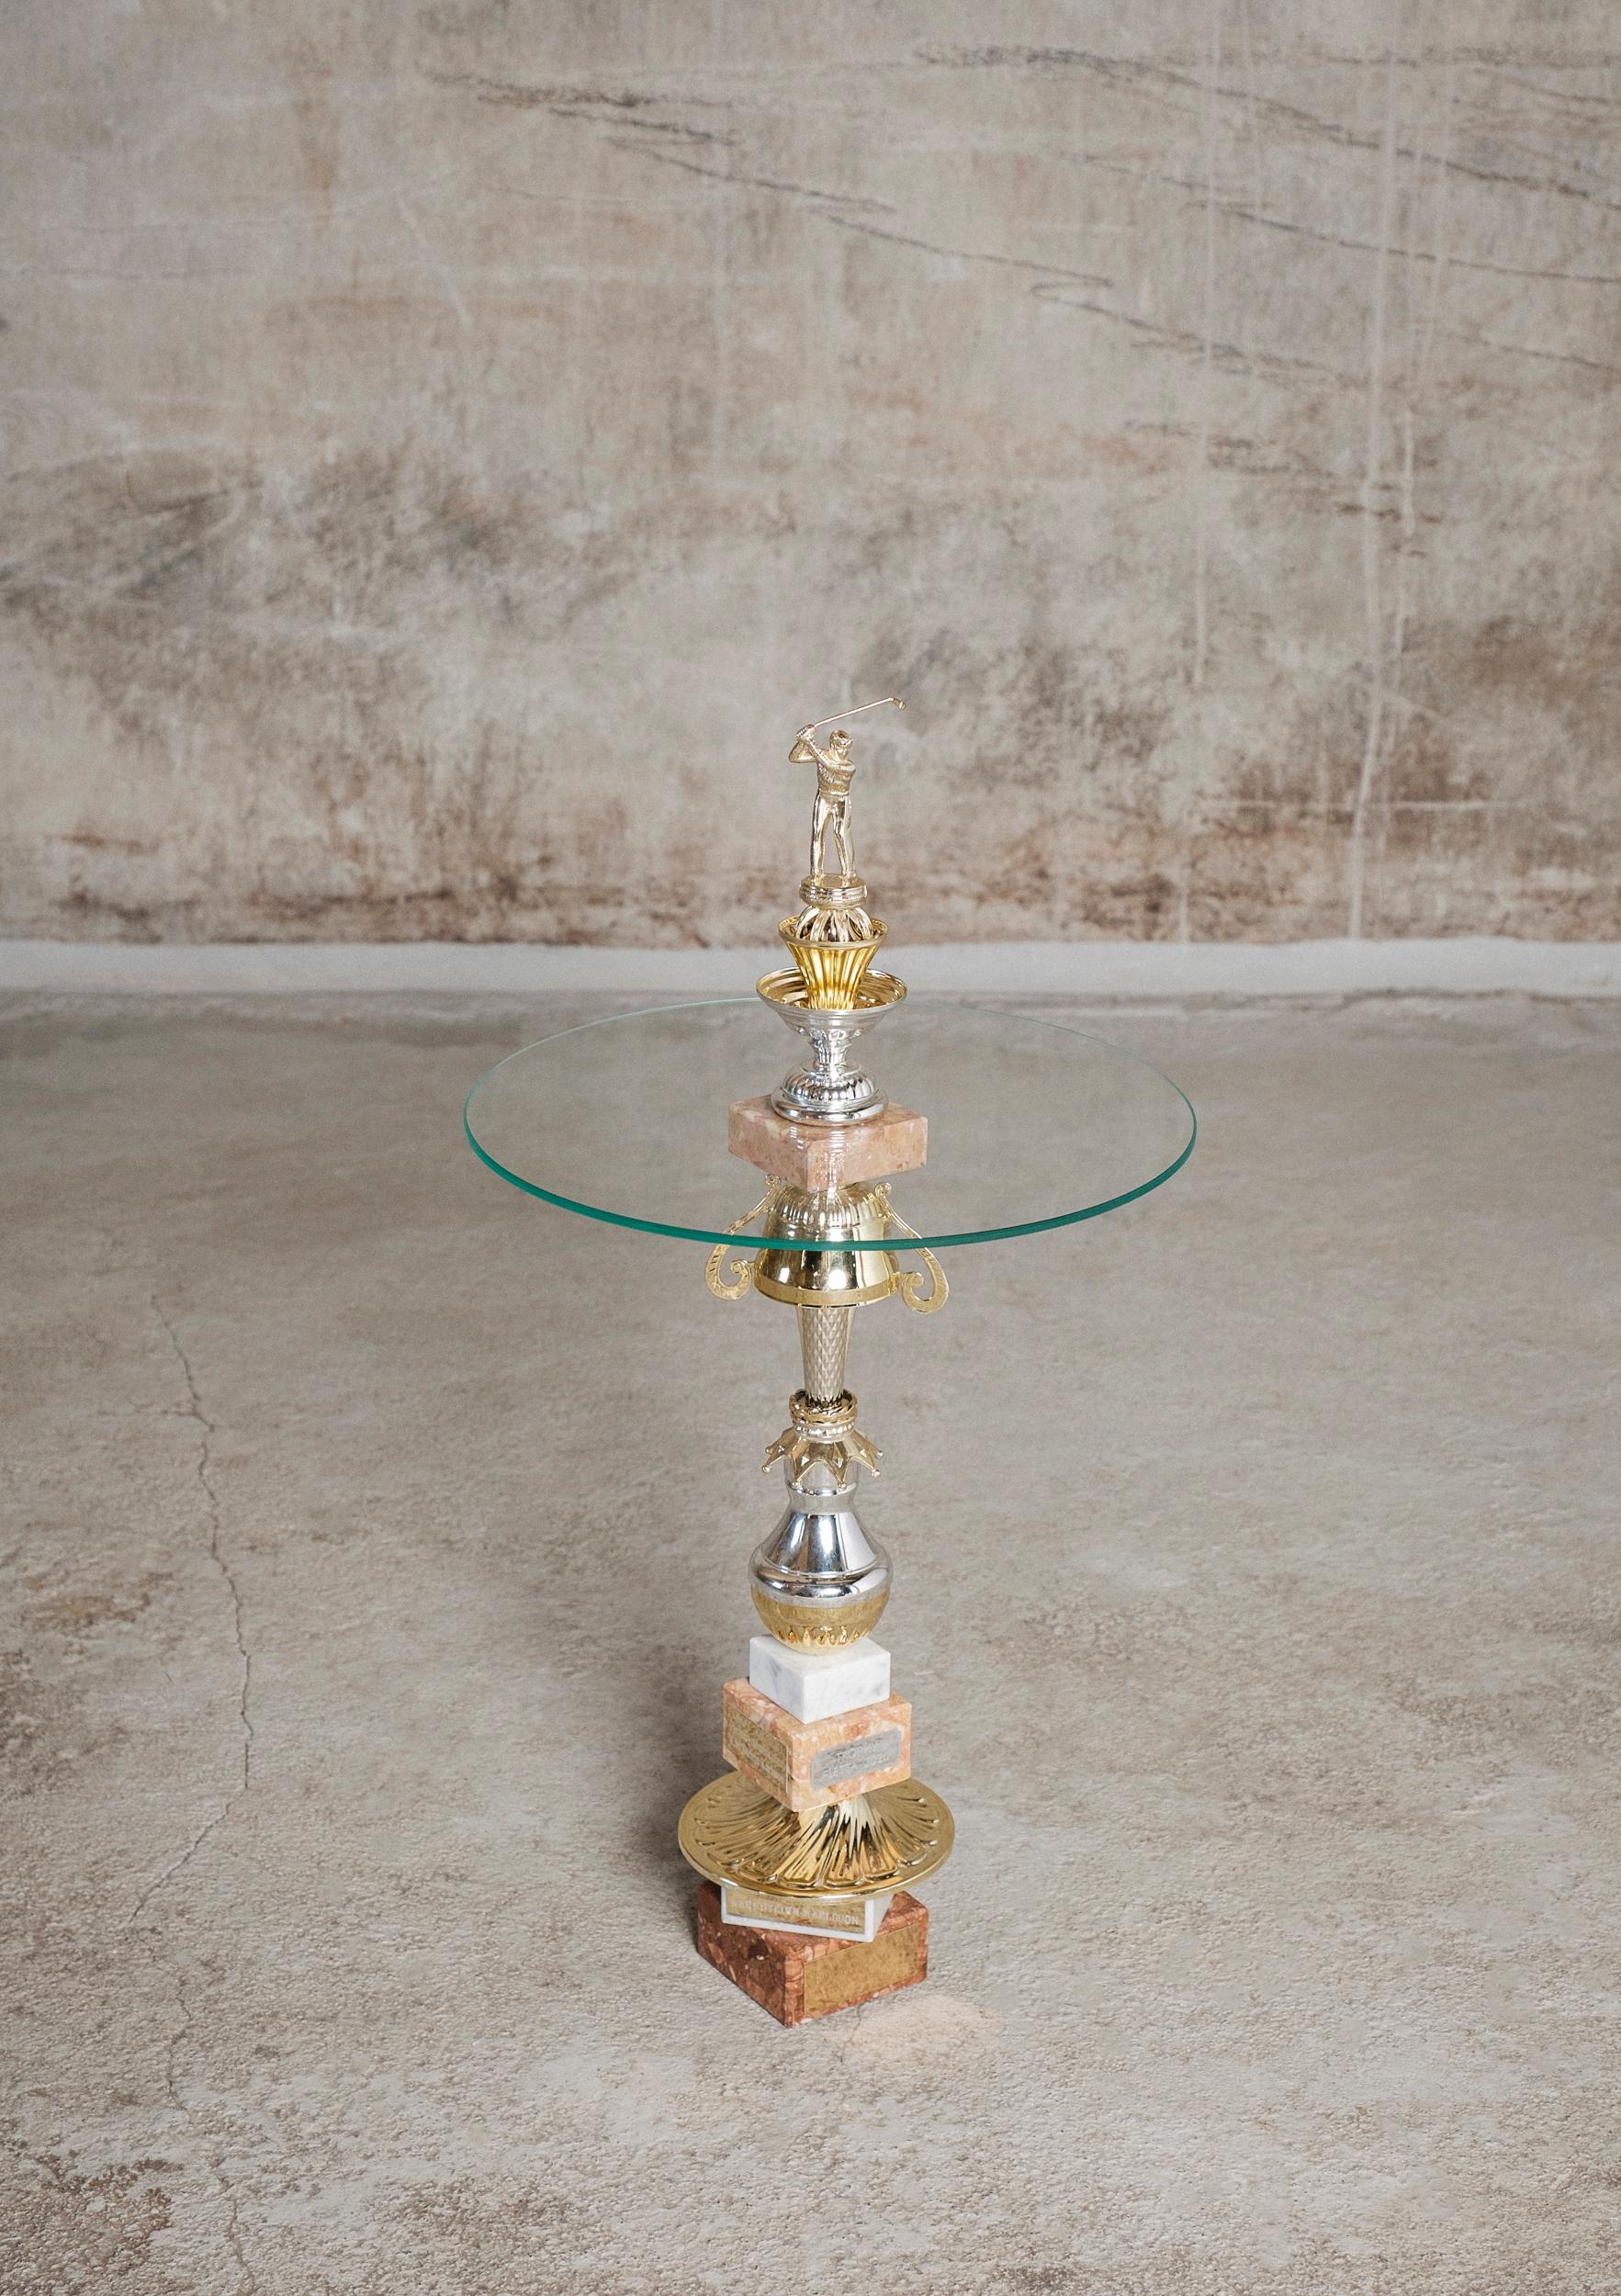 The Crown table by Flétta
Dimensions: 76 x 54.5 cm
Materials: gold, silver, pink marble

Trophy is a collection of tables, lights, flowerpots and shelves made of old trophies collected from athletes and sports clubs in Iceland. Trophies are a